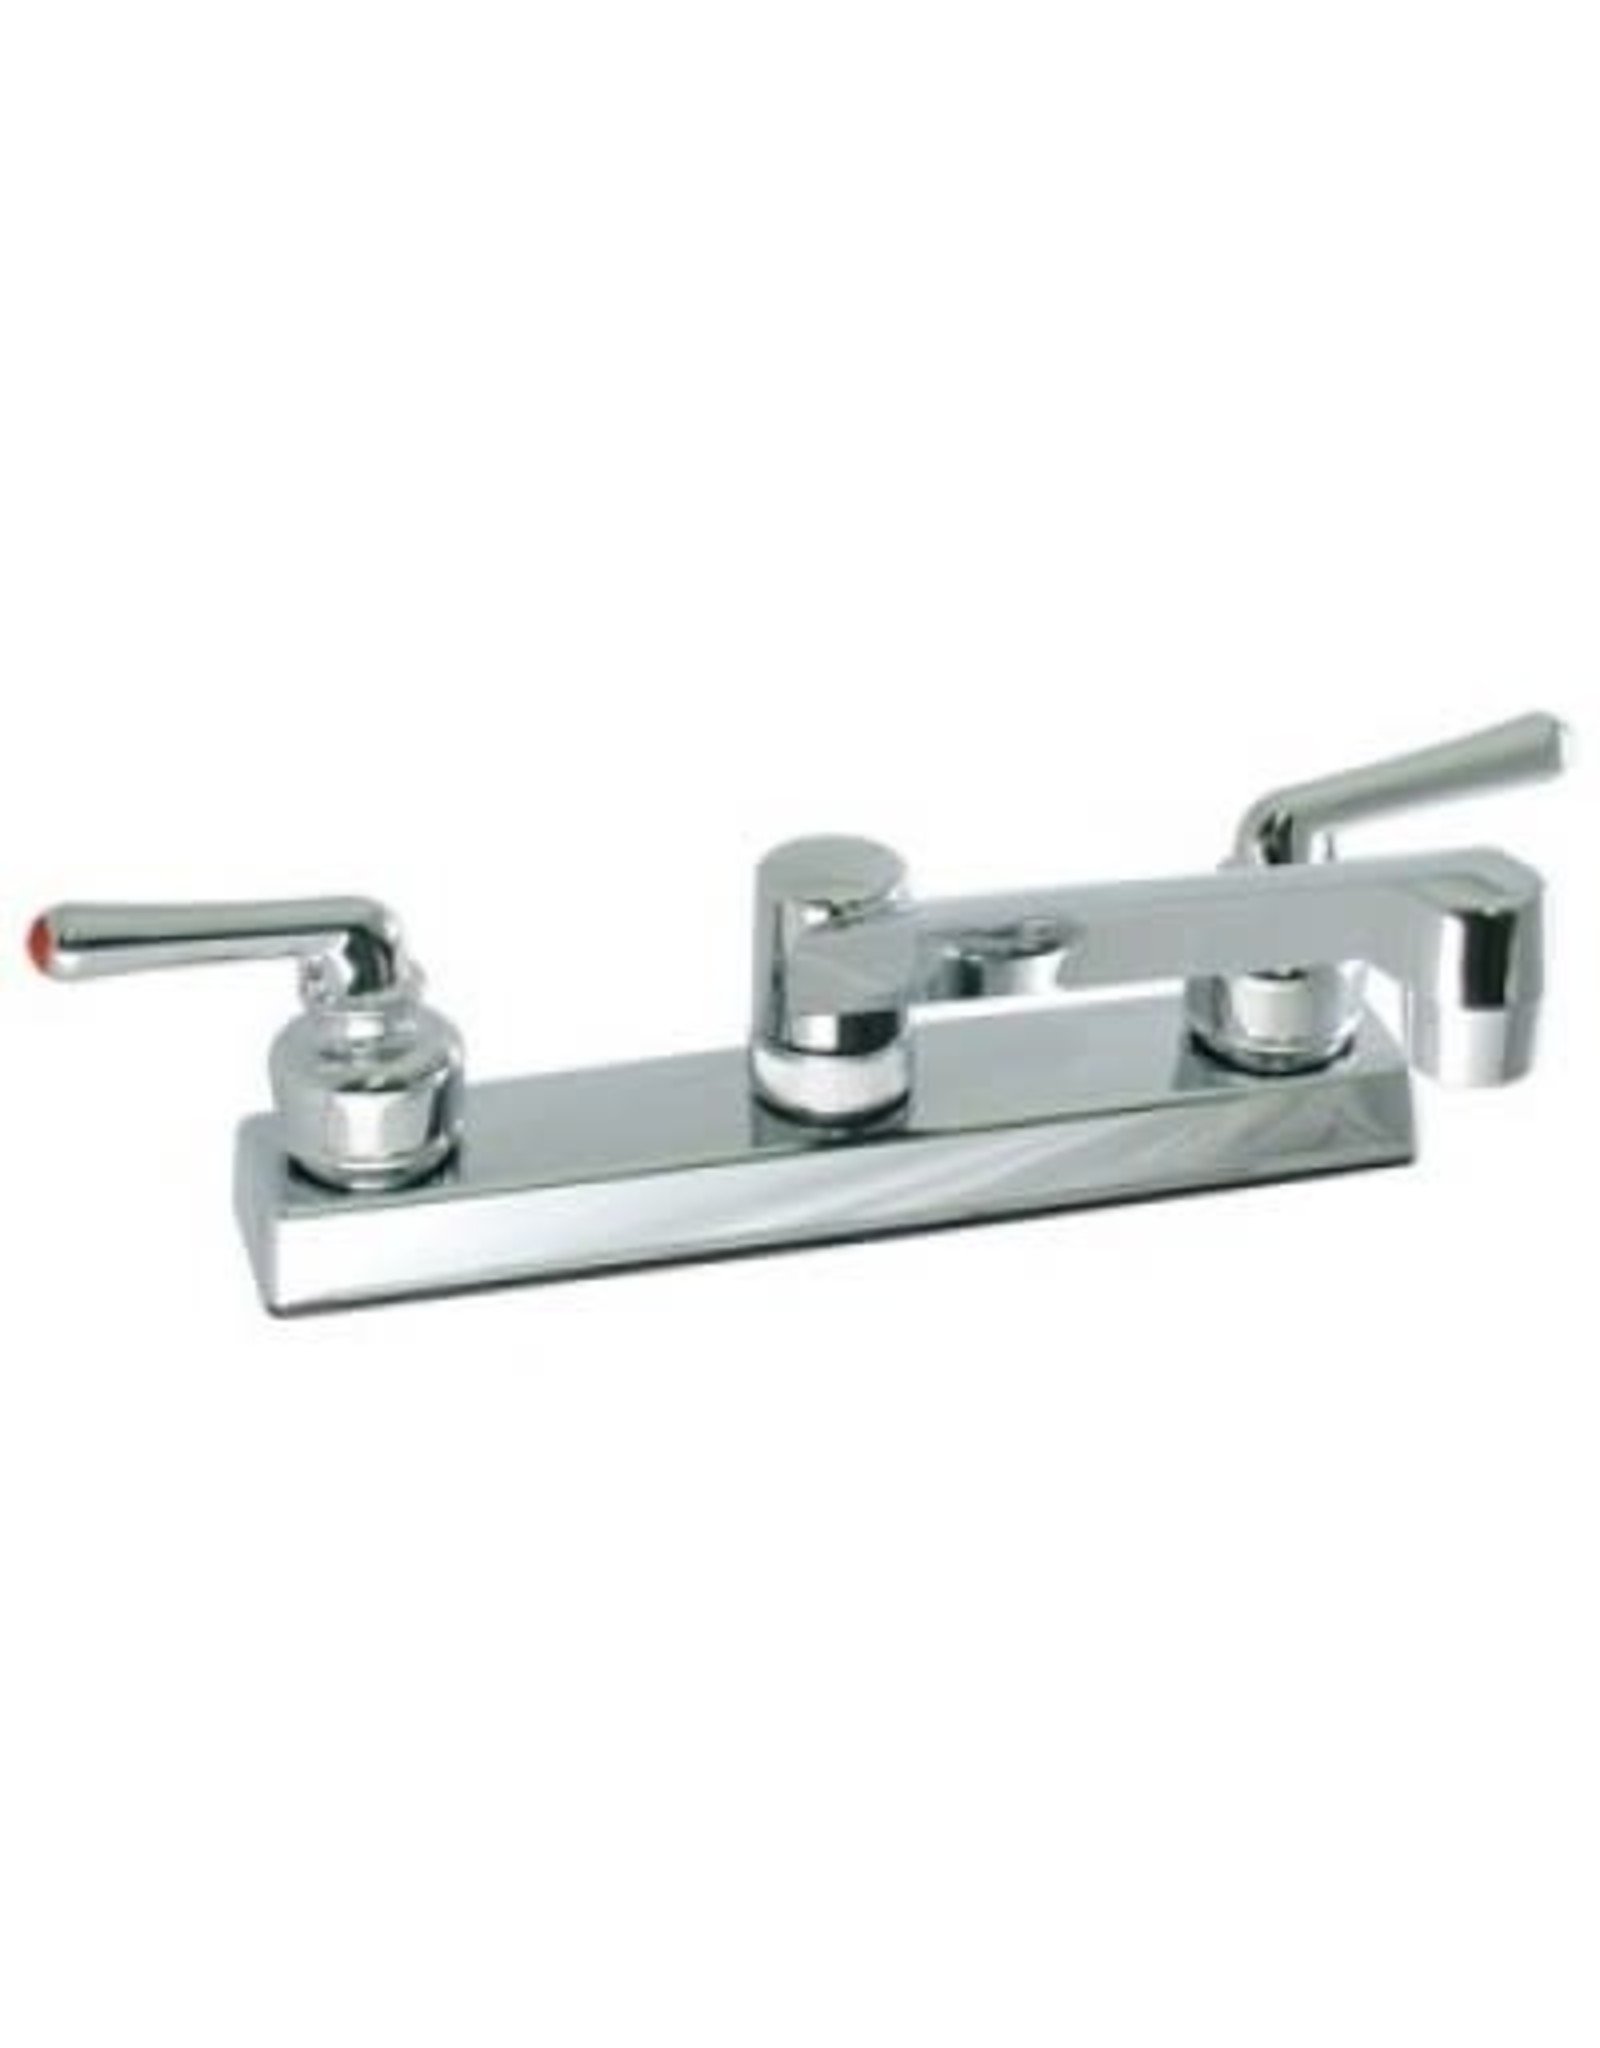 PH FAUCET 8IN CHROME TEACUP HANDLE